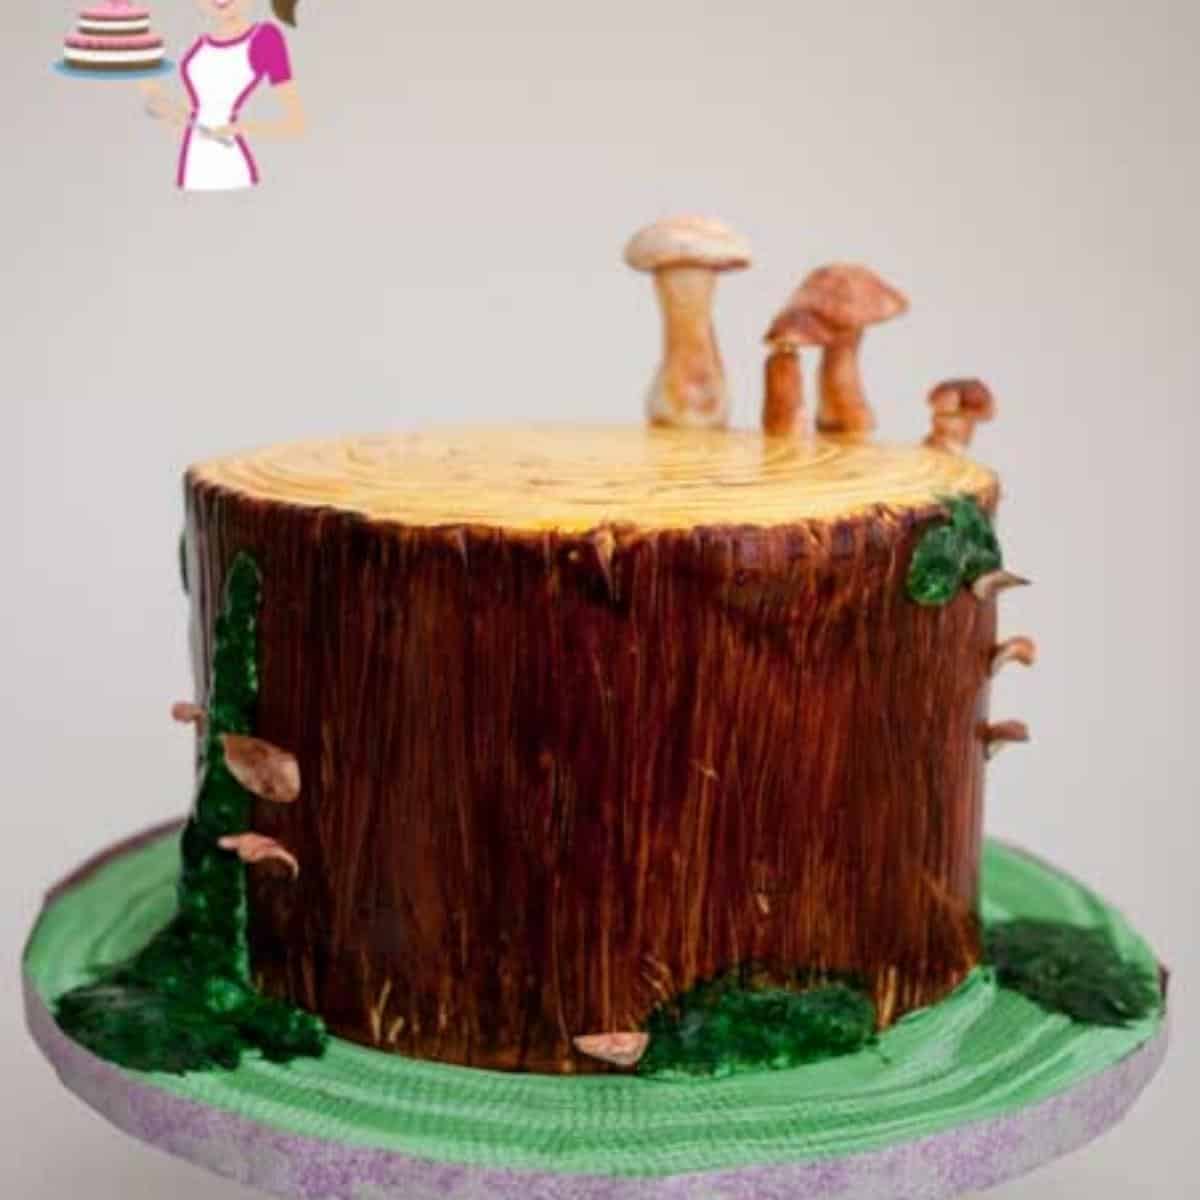 A block of wood cake with mushrooms